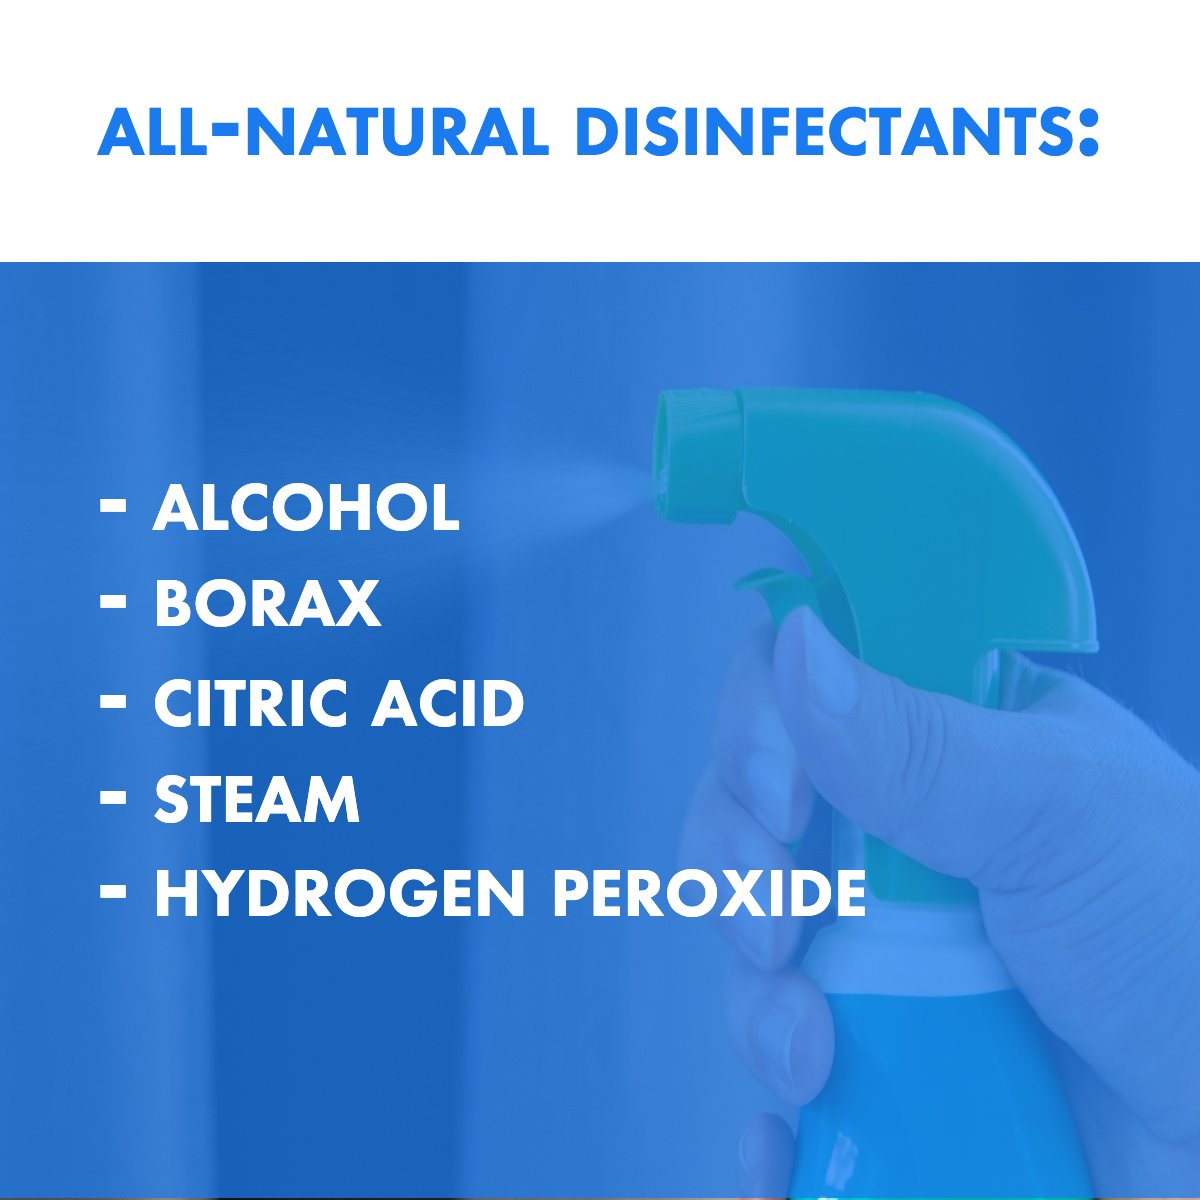 Do you know any all-natural disinfectants?

Leave us below the best all-natural disinfectants you have tested out! 👇

#Cleaningfacts    #Facts    #cleaning    #natural 

#halifax #halifaxhomesforsale #homesinhalifax #nshomes #halifaxrealtor #halifaxns